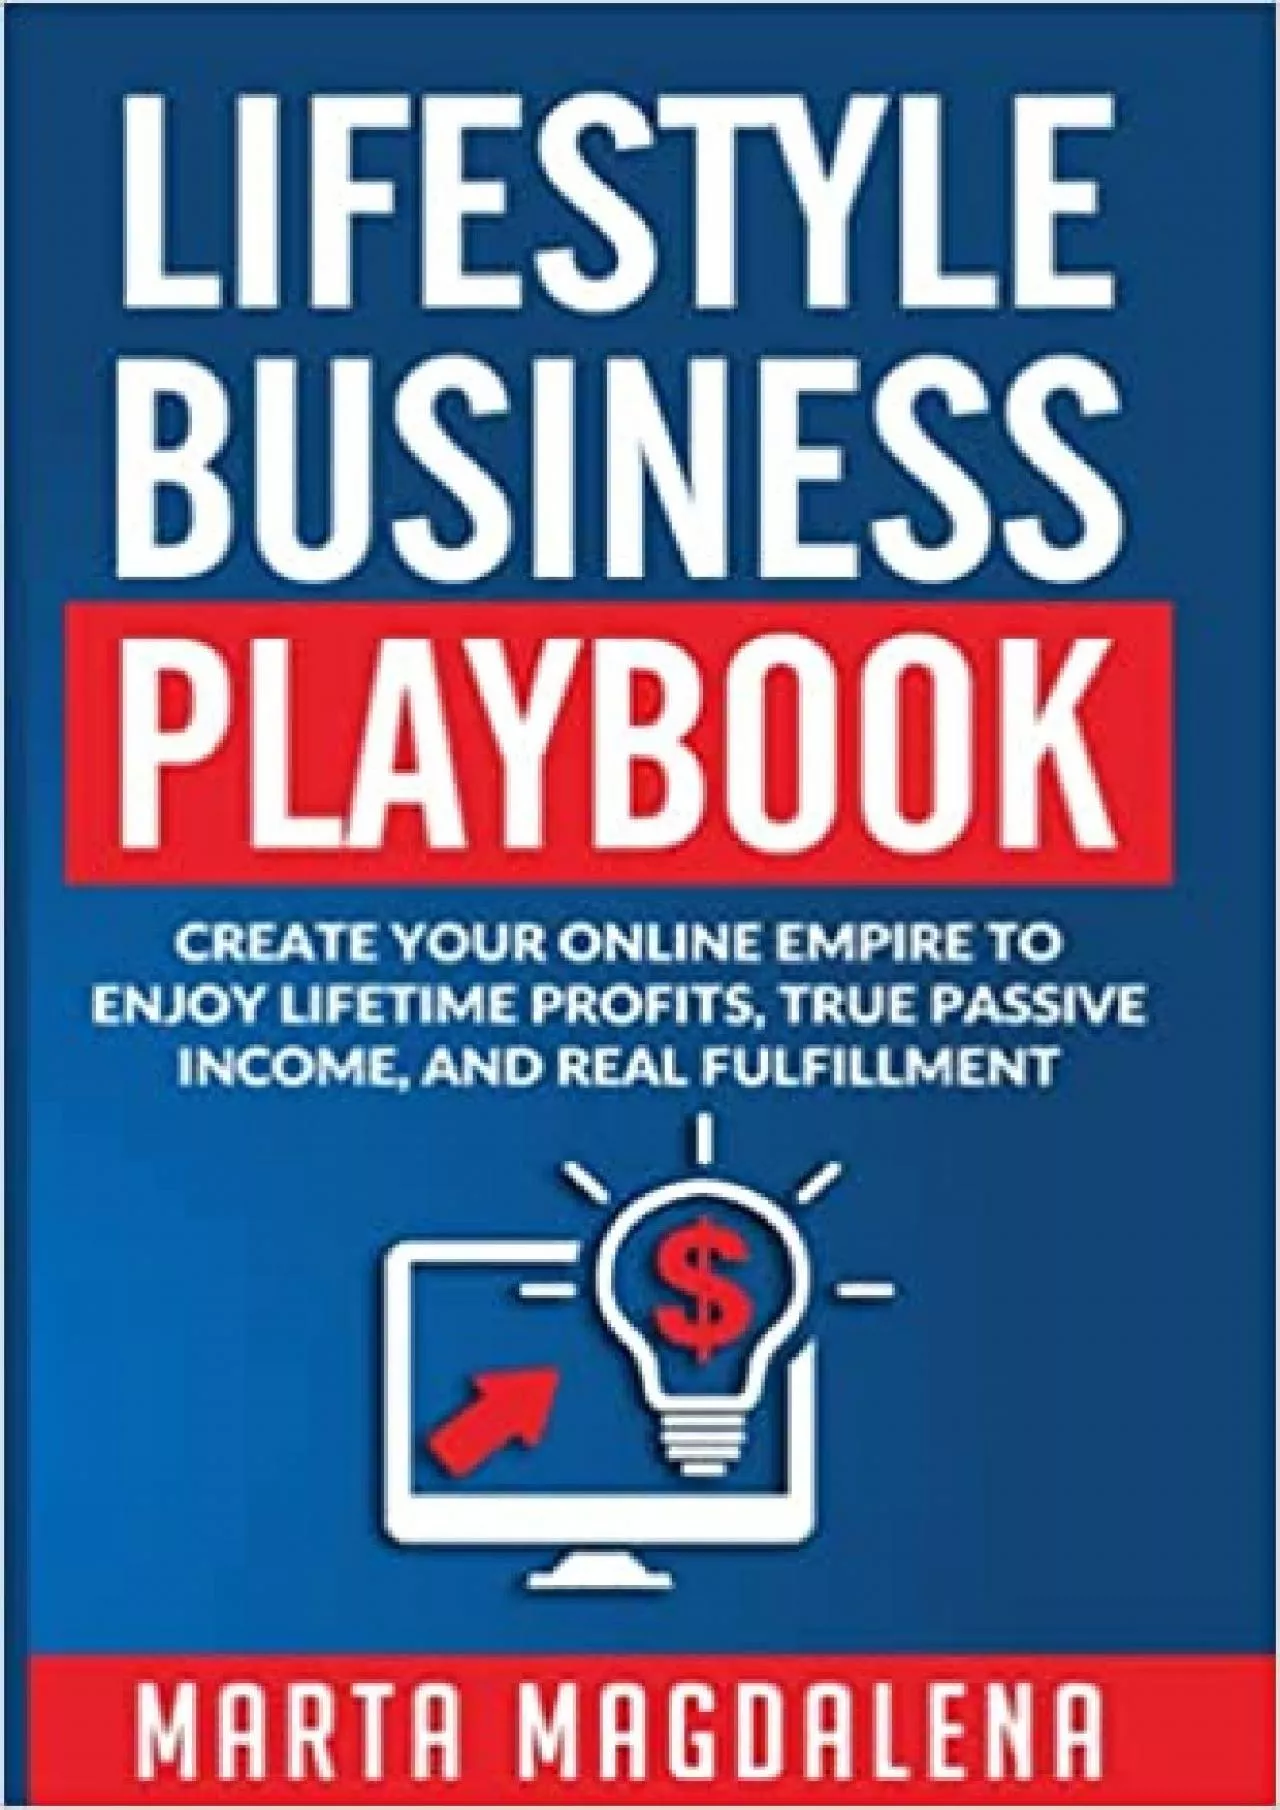 Lifestyle Business Playbook Create Your Online Empire to Enjoy True Passive Income, Lifetime